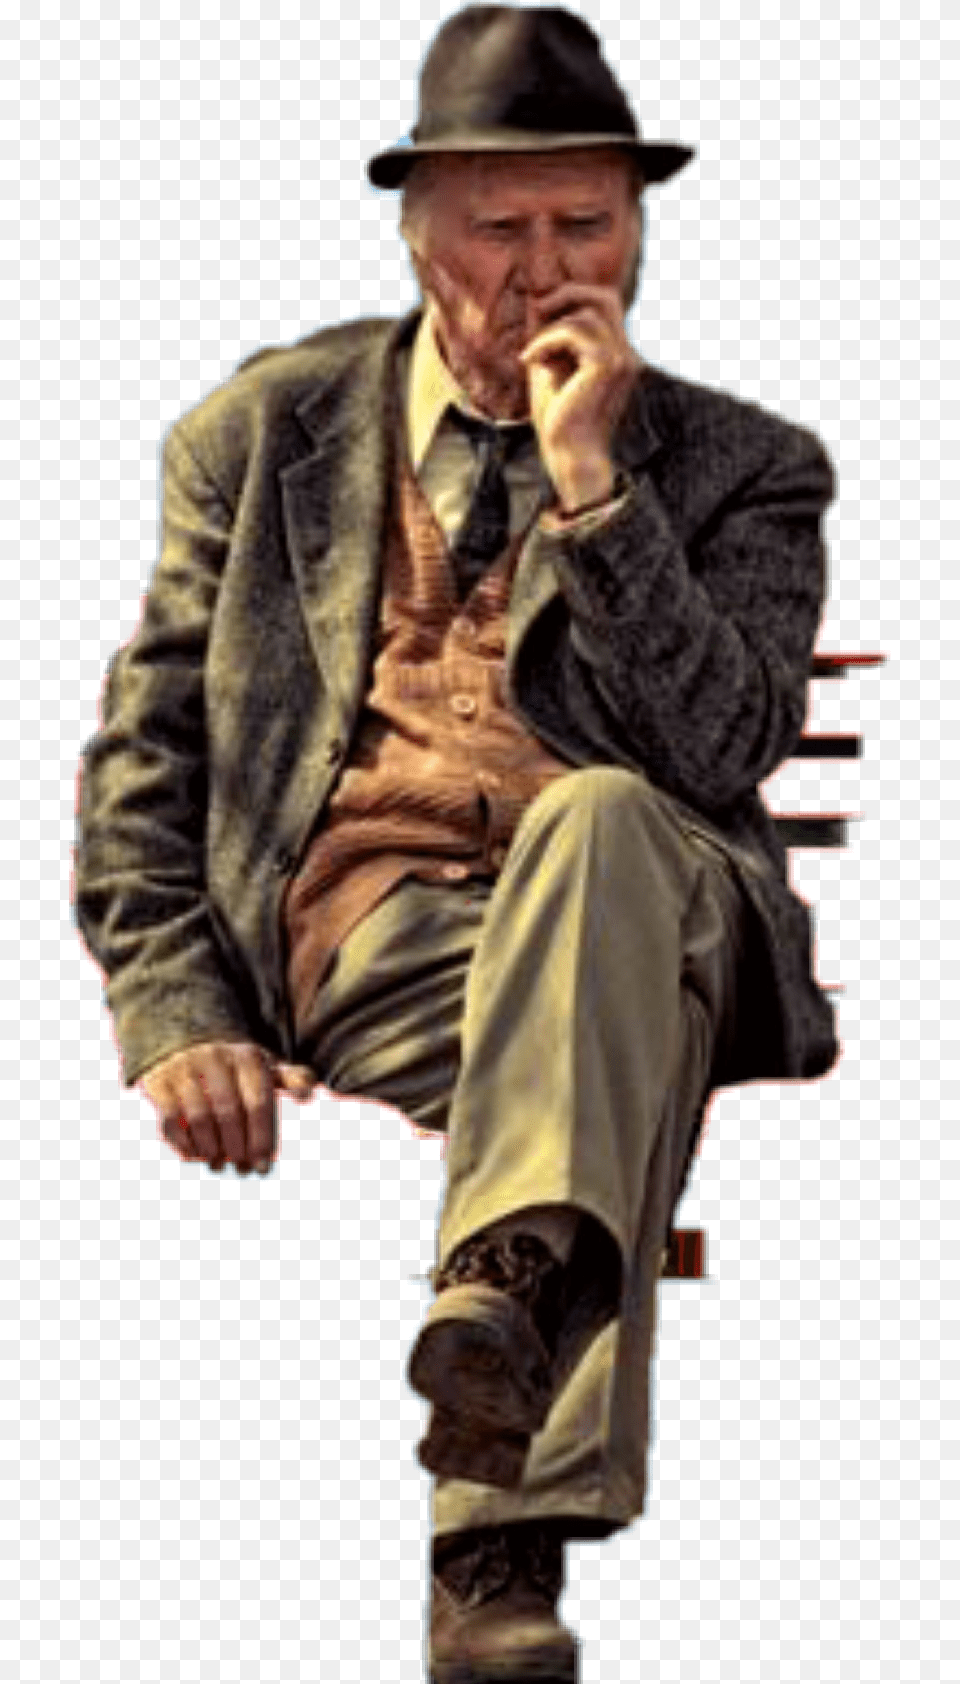 Man Old Man Man Sitting Man With Hat Gentleman, Clothing, Coat, Adult, Photography Png Image